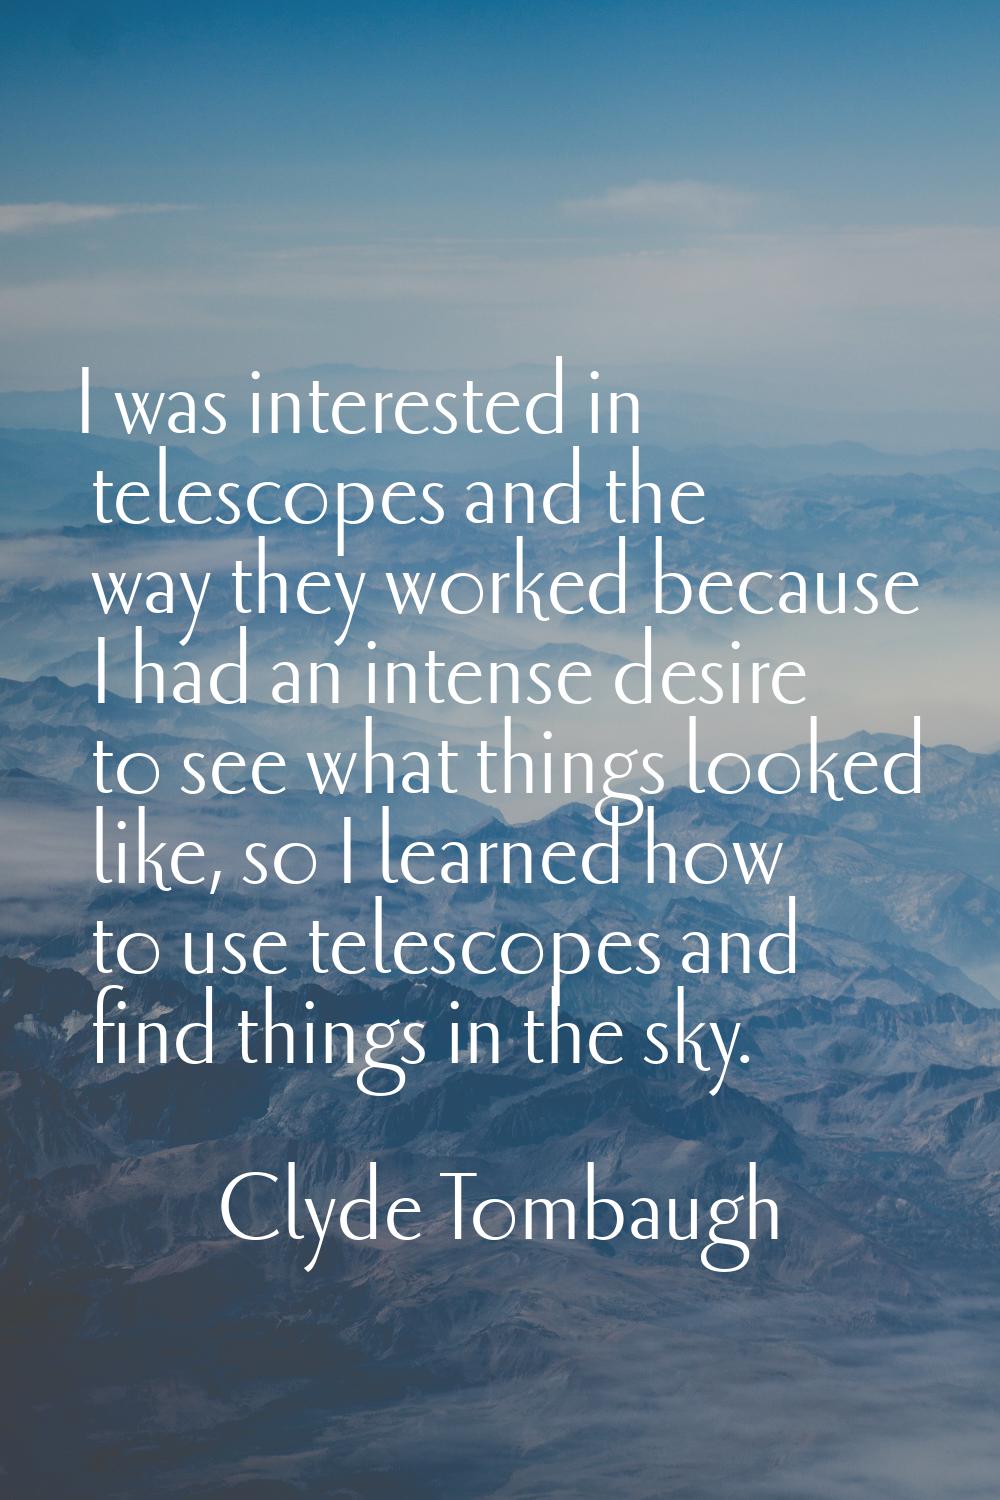 I was interested in telescopes and the way they worked because I had an intense desire to see what 